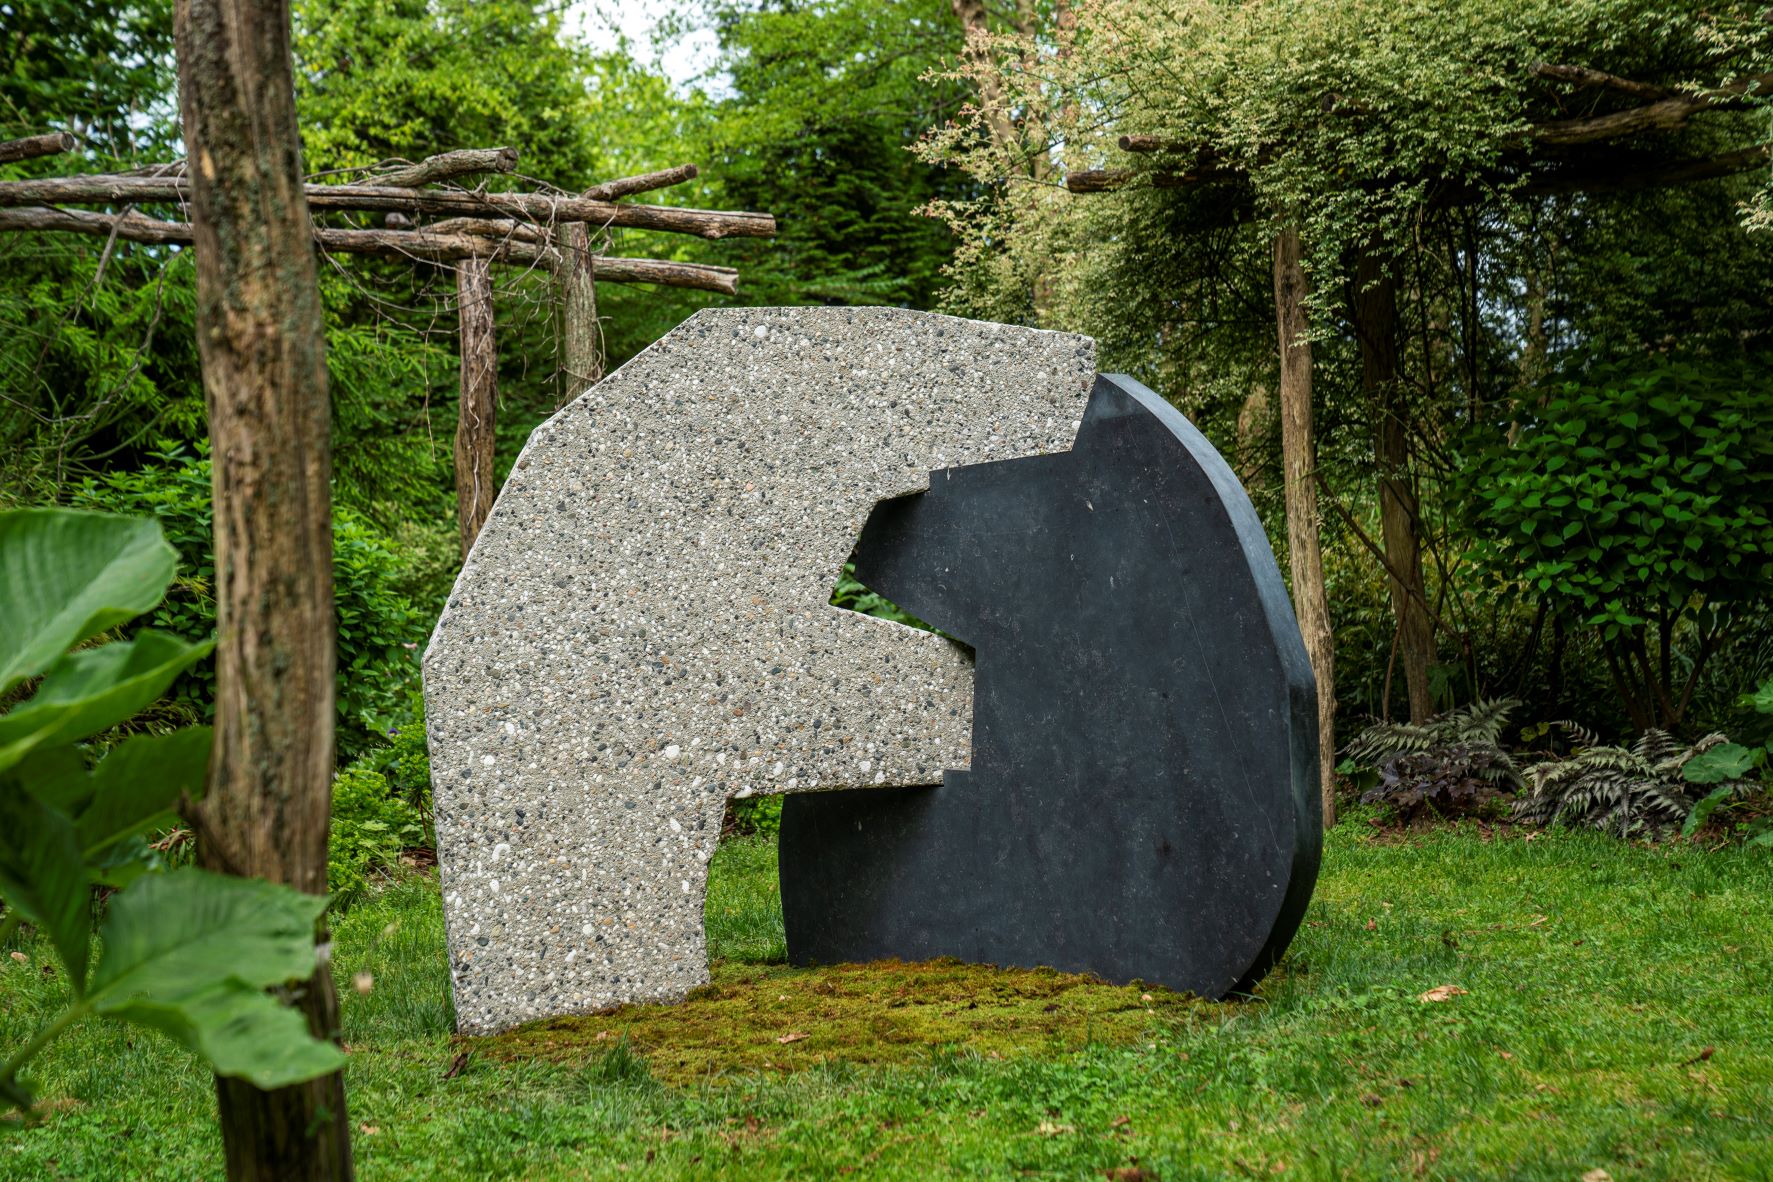 Sculpture by Sam Moyer on view at the Landcraft Garden Foundation on the North Fork